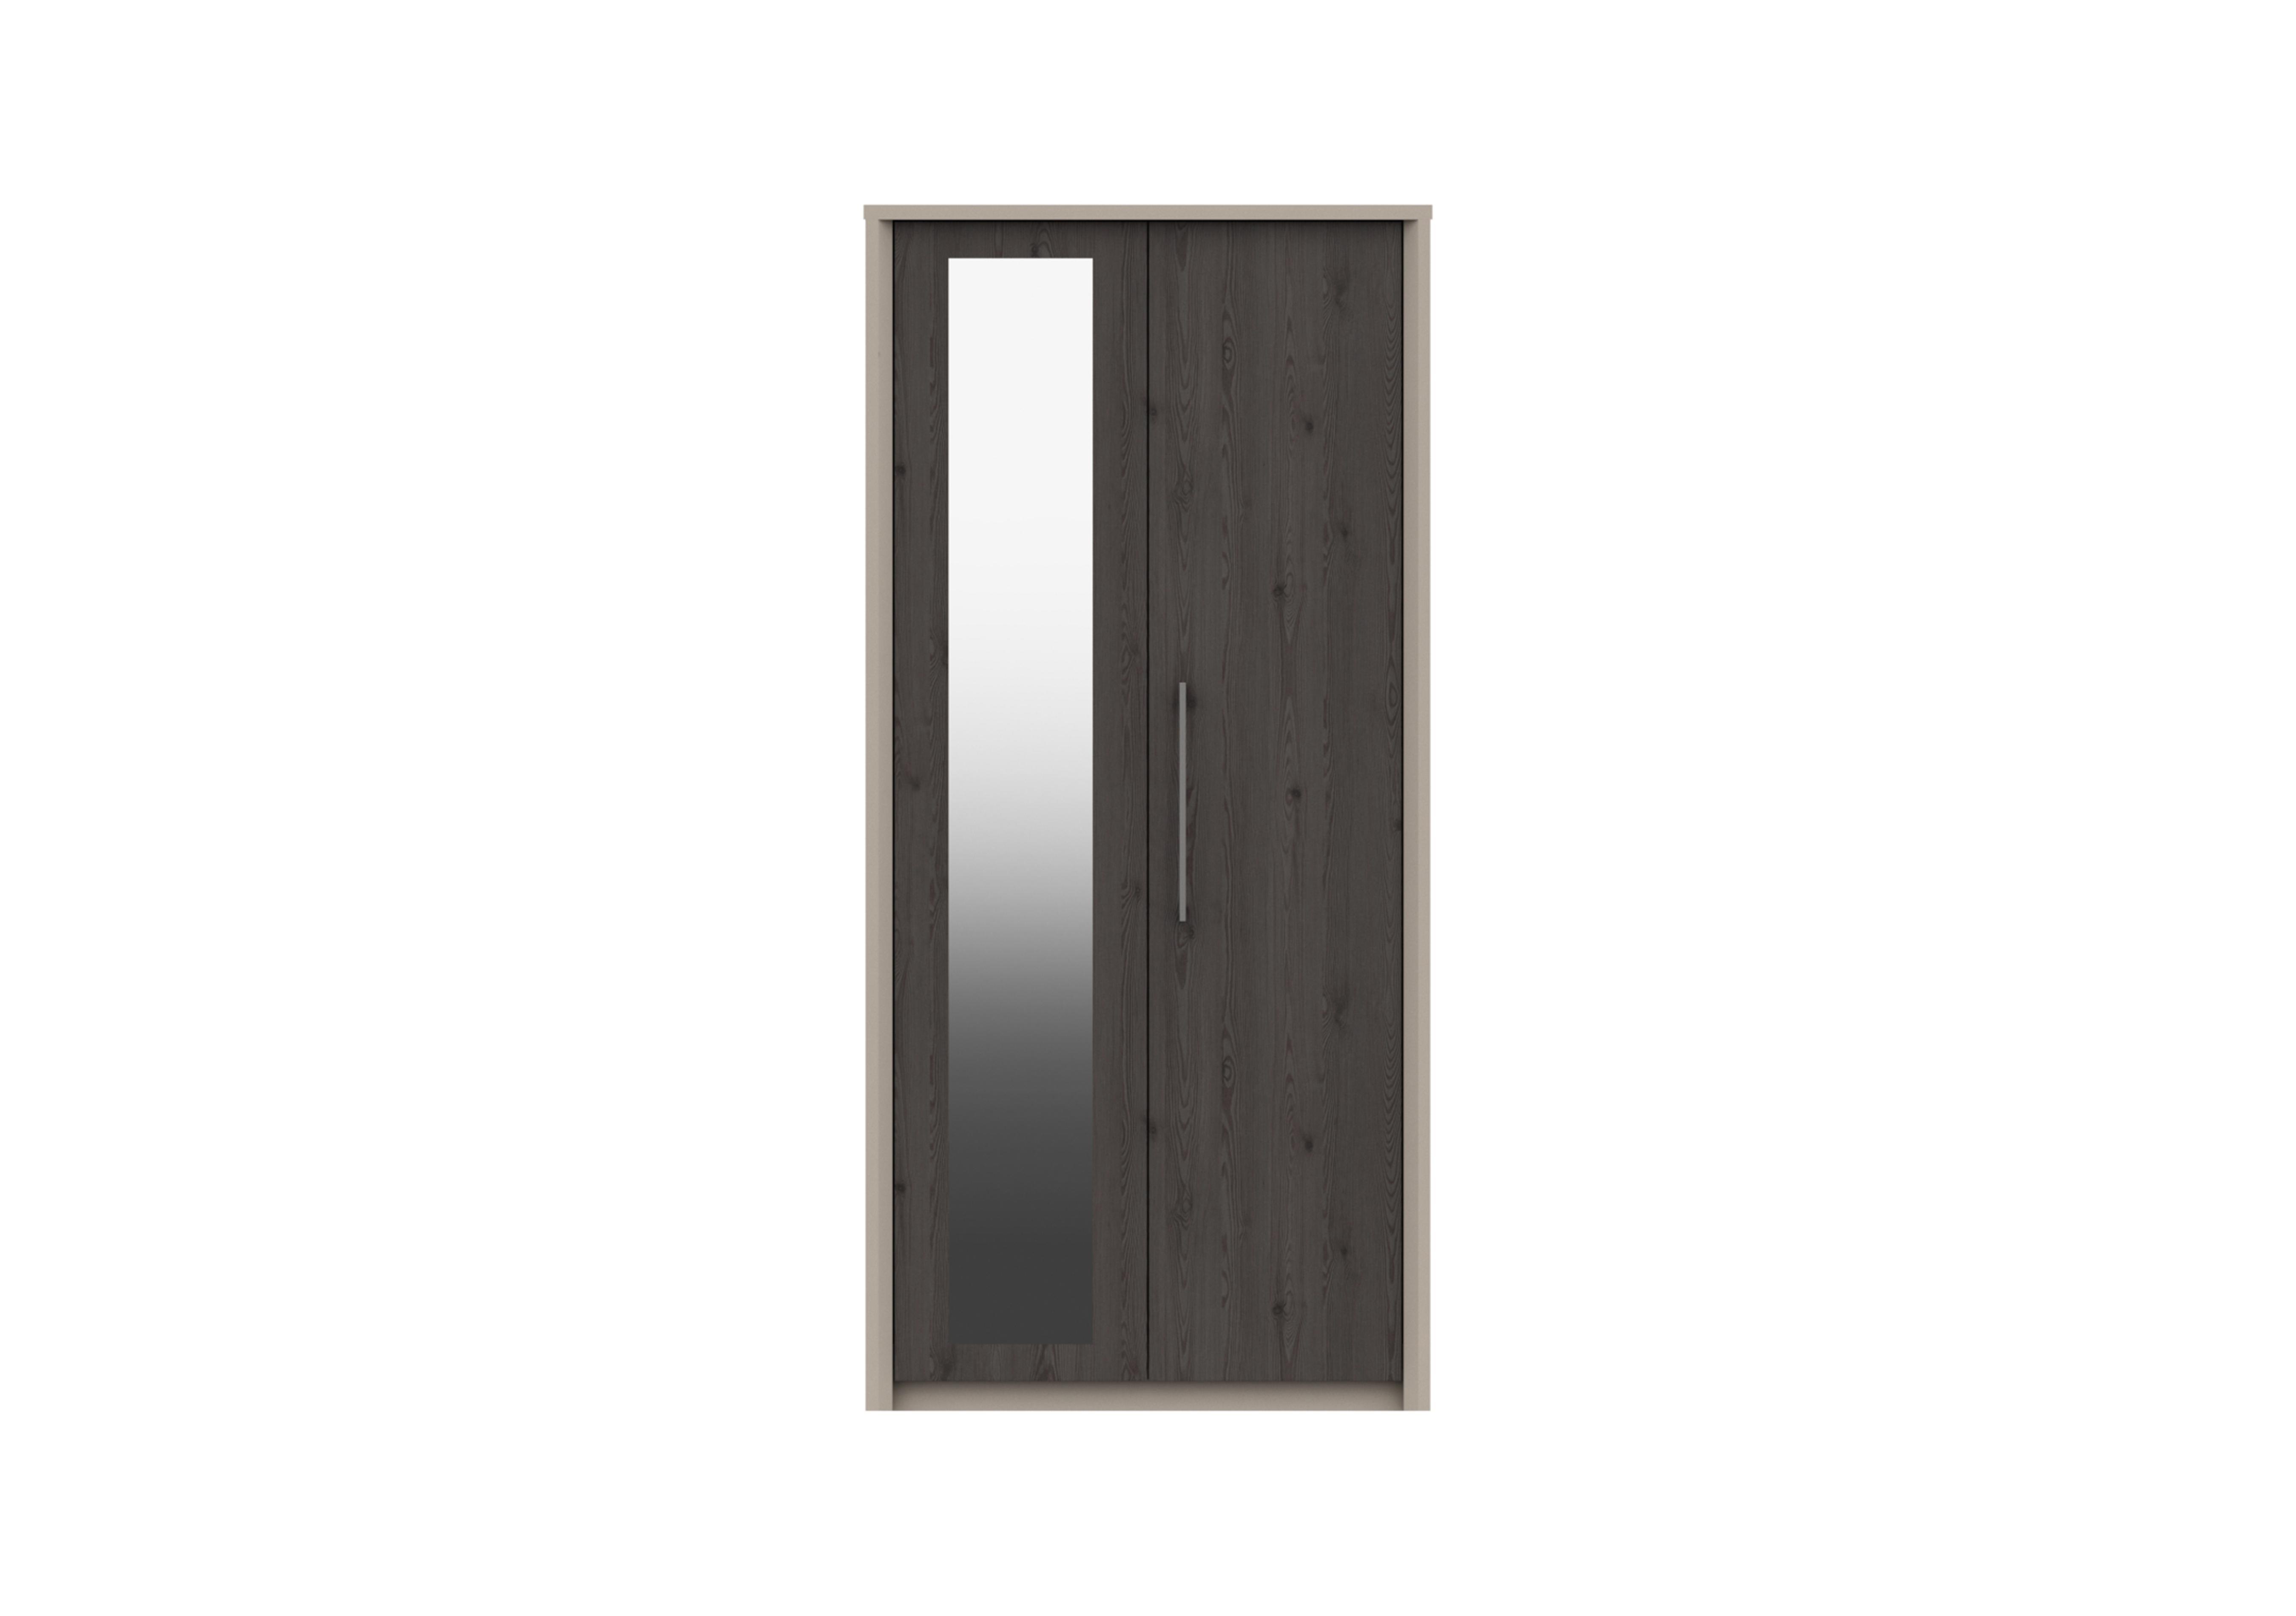 Paddington 2 Door Wardrobe with Mirror in Fired Earth/Anthracite Larch on Furniture Village